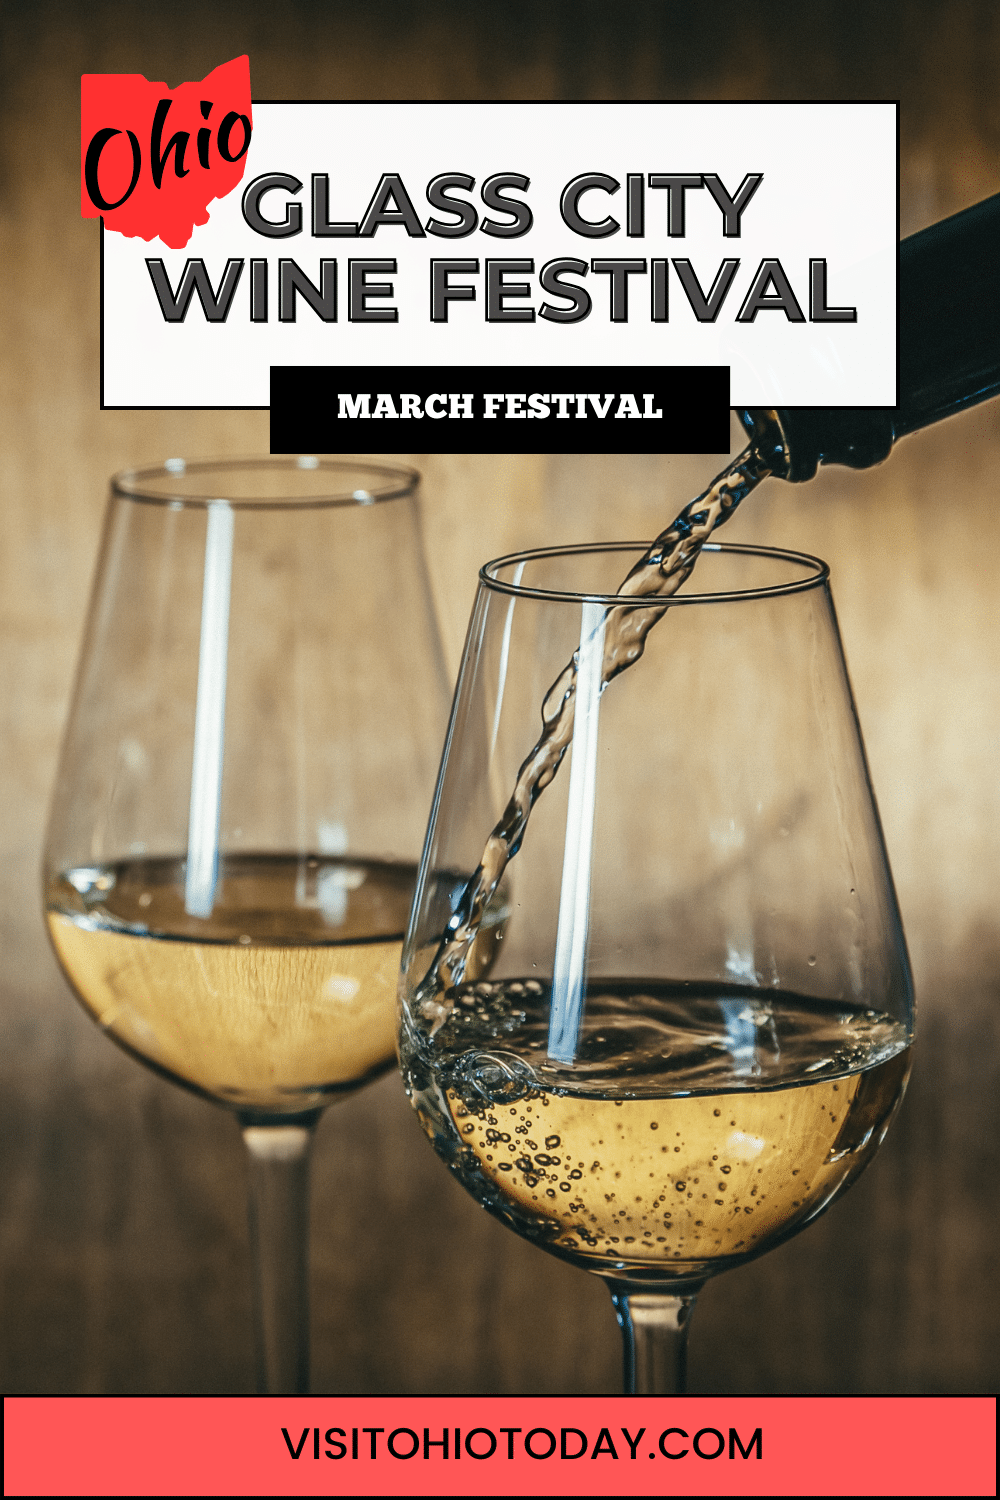 The Glass City Wine Festival at the Glass City Center in Toledo is a premier wine, food, and shopping experience.